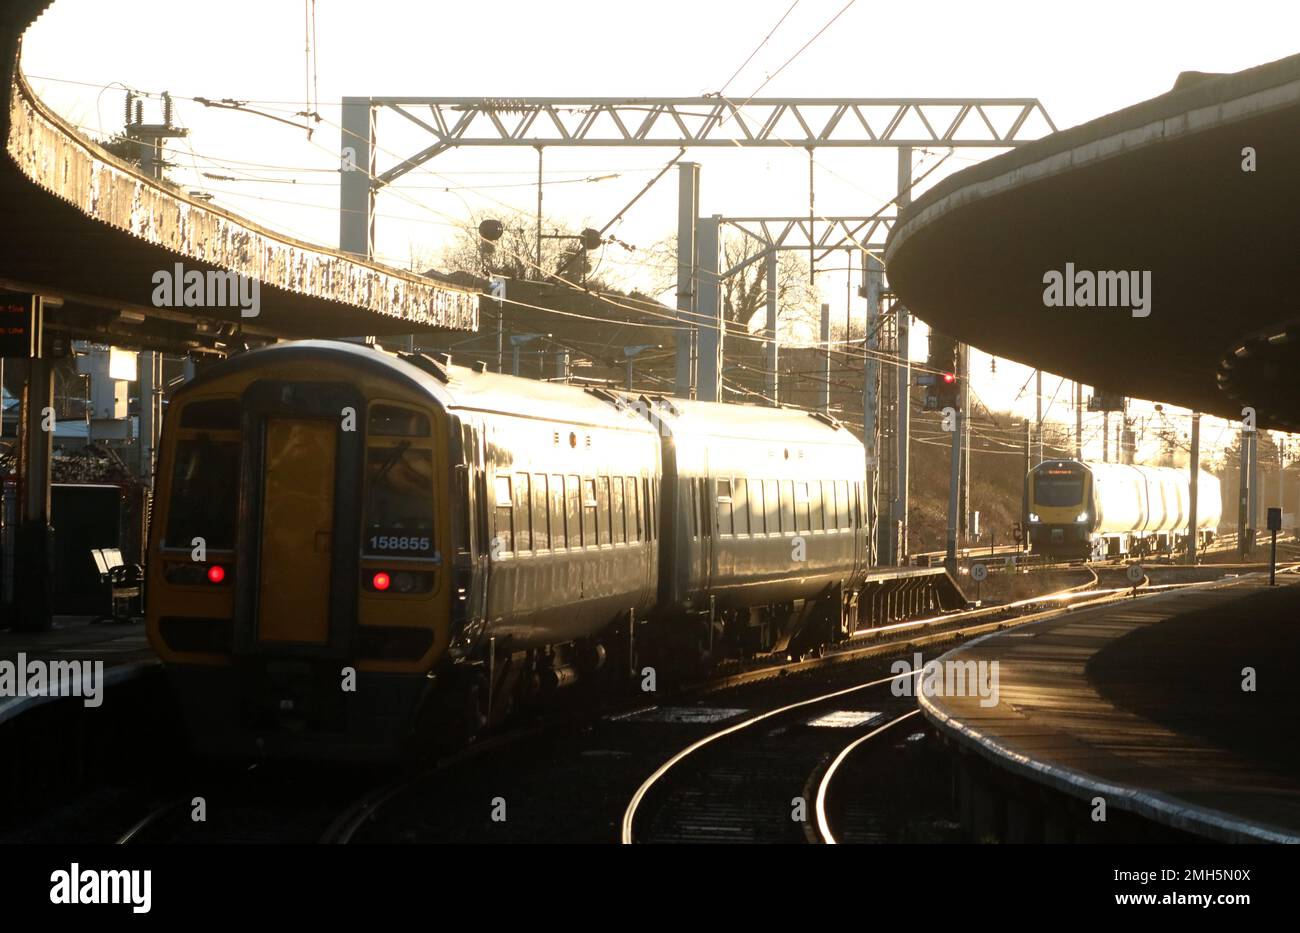 Northern trains express sprinter dmu waiting in Carnforth railway station, 25th January 2023, while Civity dmu passes on West Coast Main Line. Stock Photo